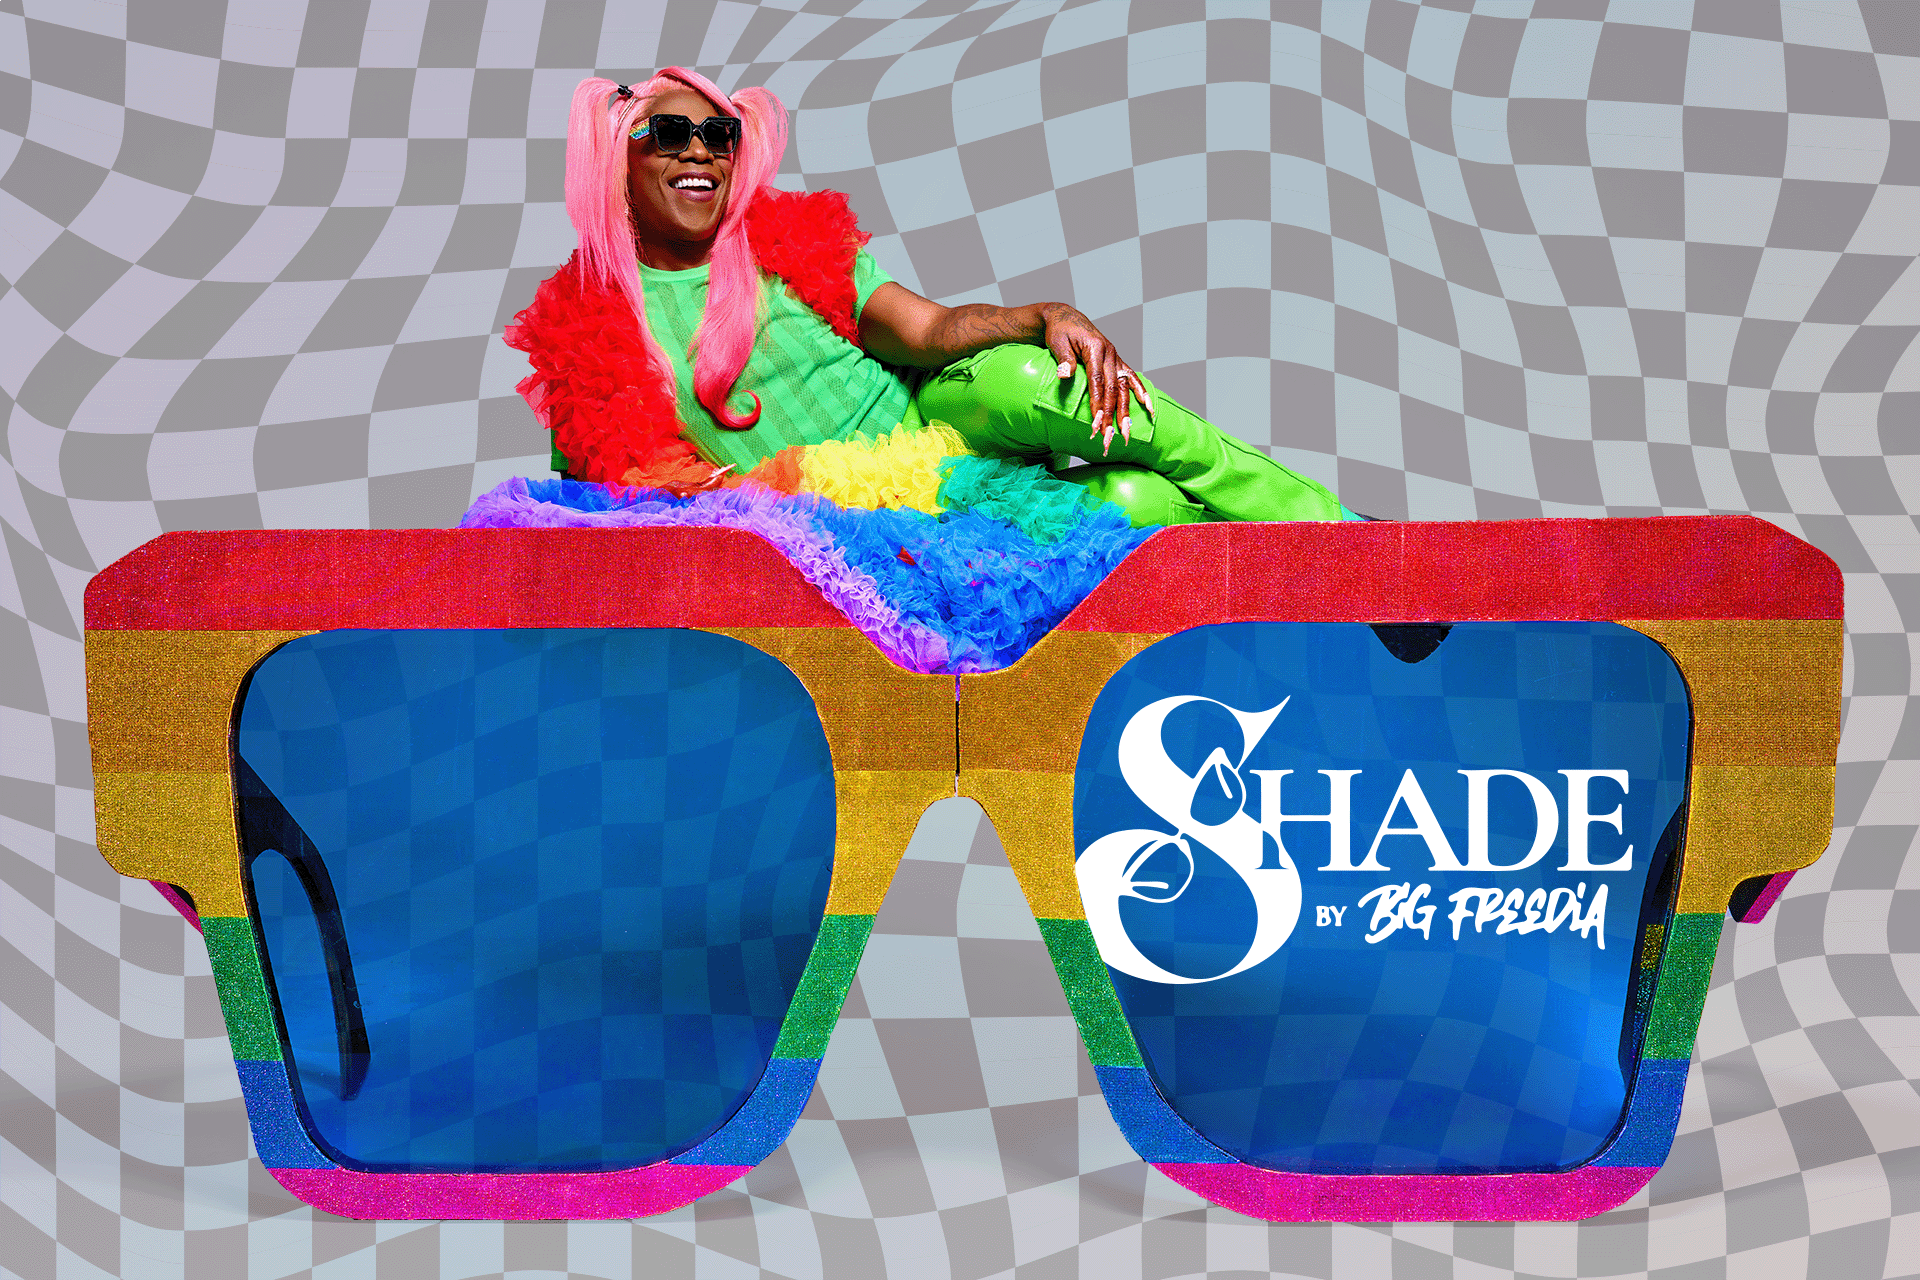 THROW SOME SHADE - ORDER NOW